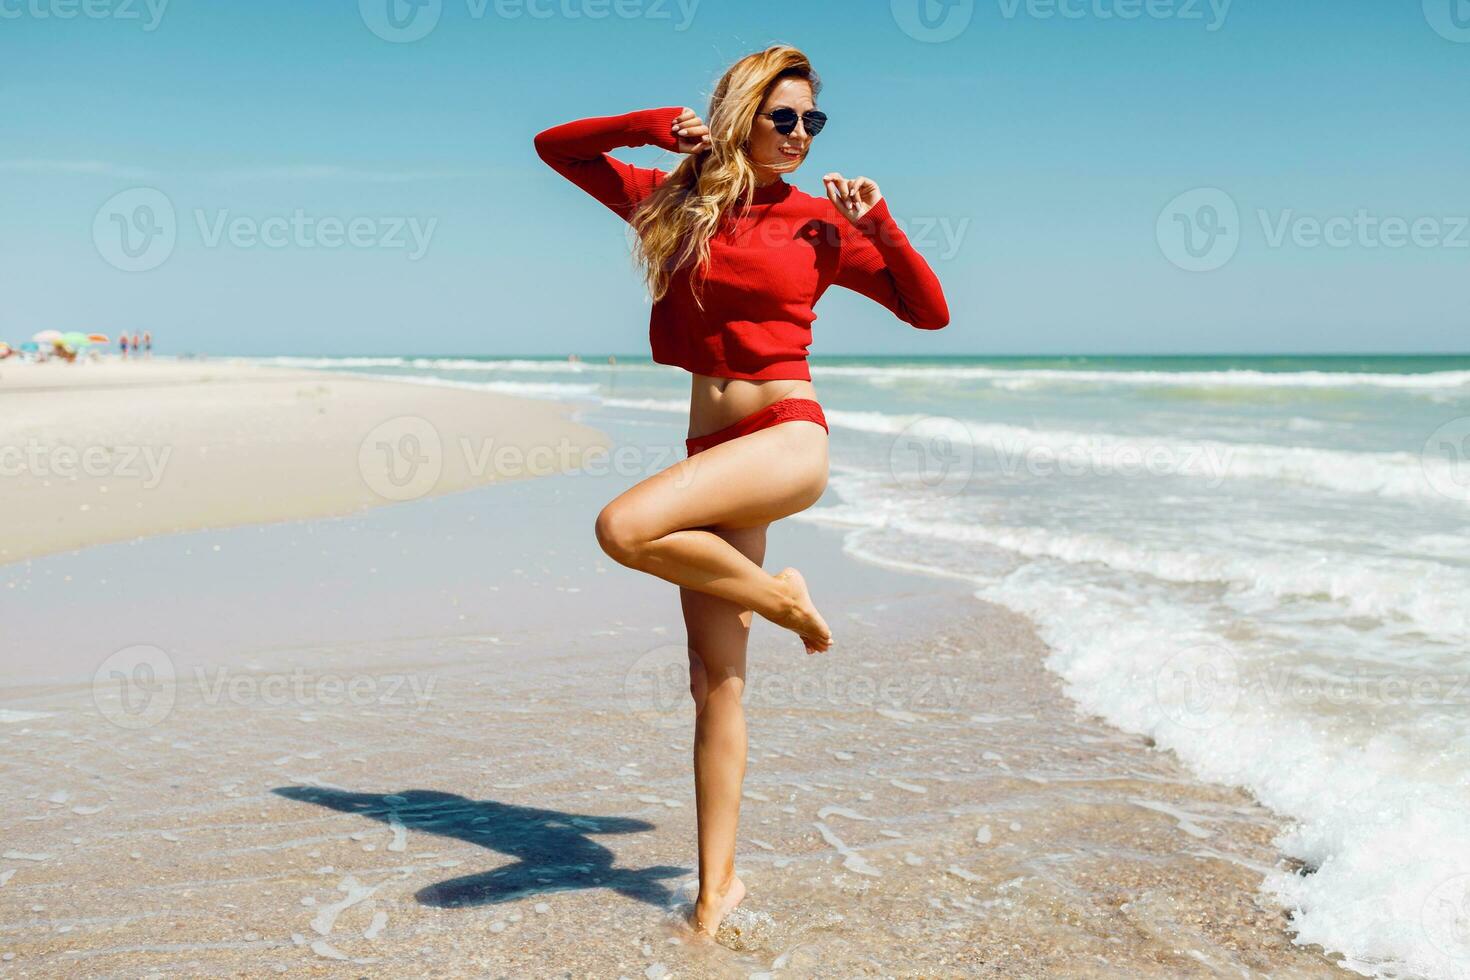 Traveling blond woman jumping with happy expression , turns around in water. Ocean waves background. Wearing red bikini. Full length. Summer vacation. photo